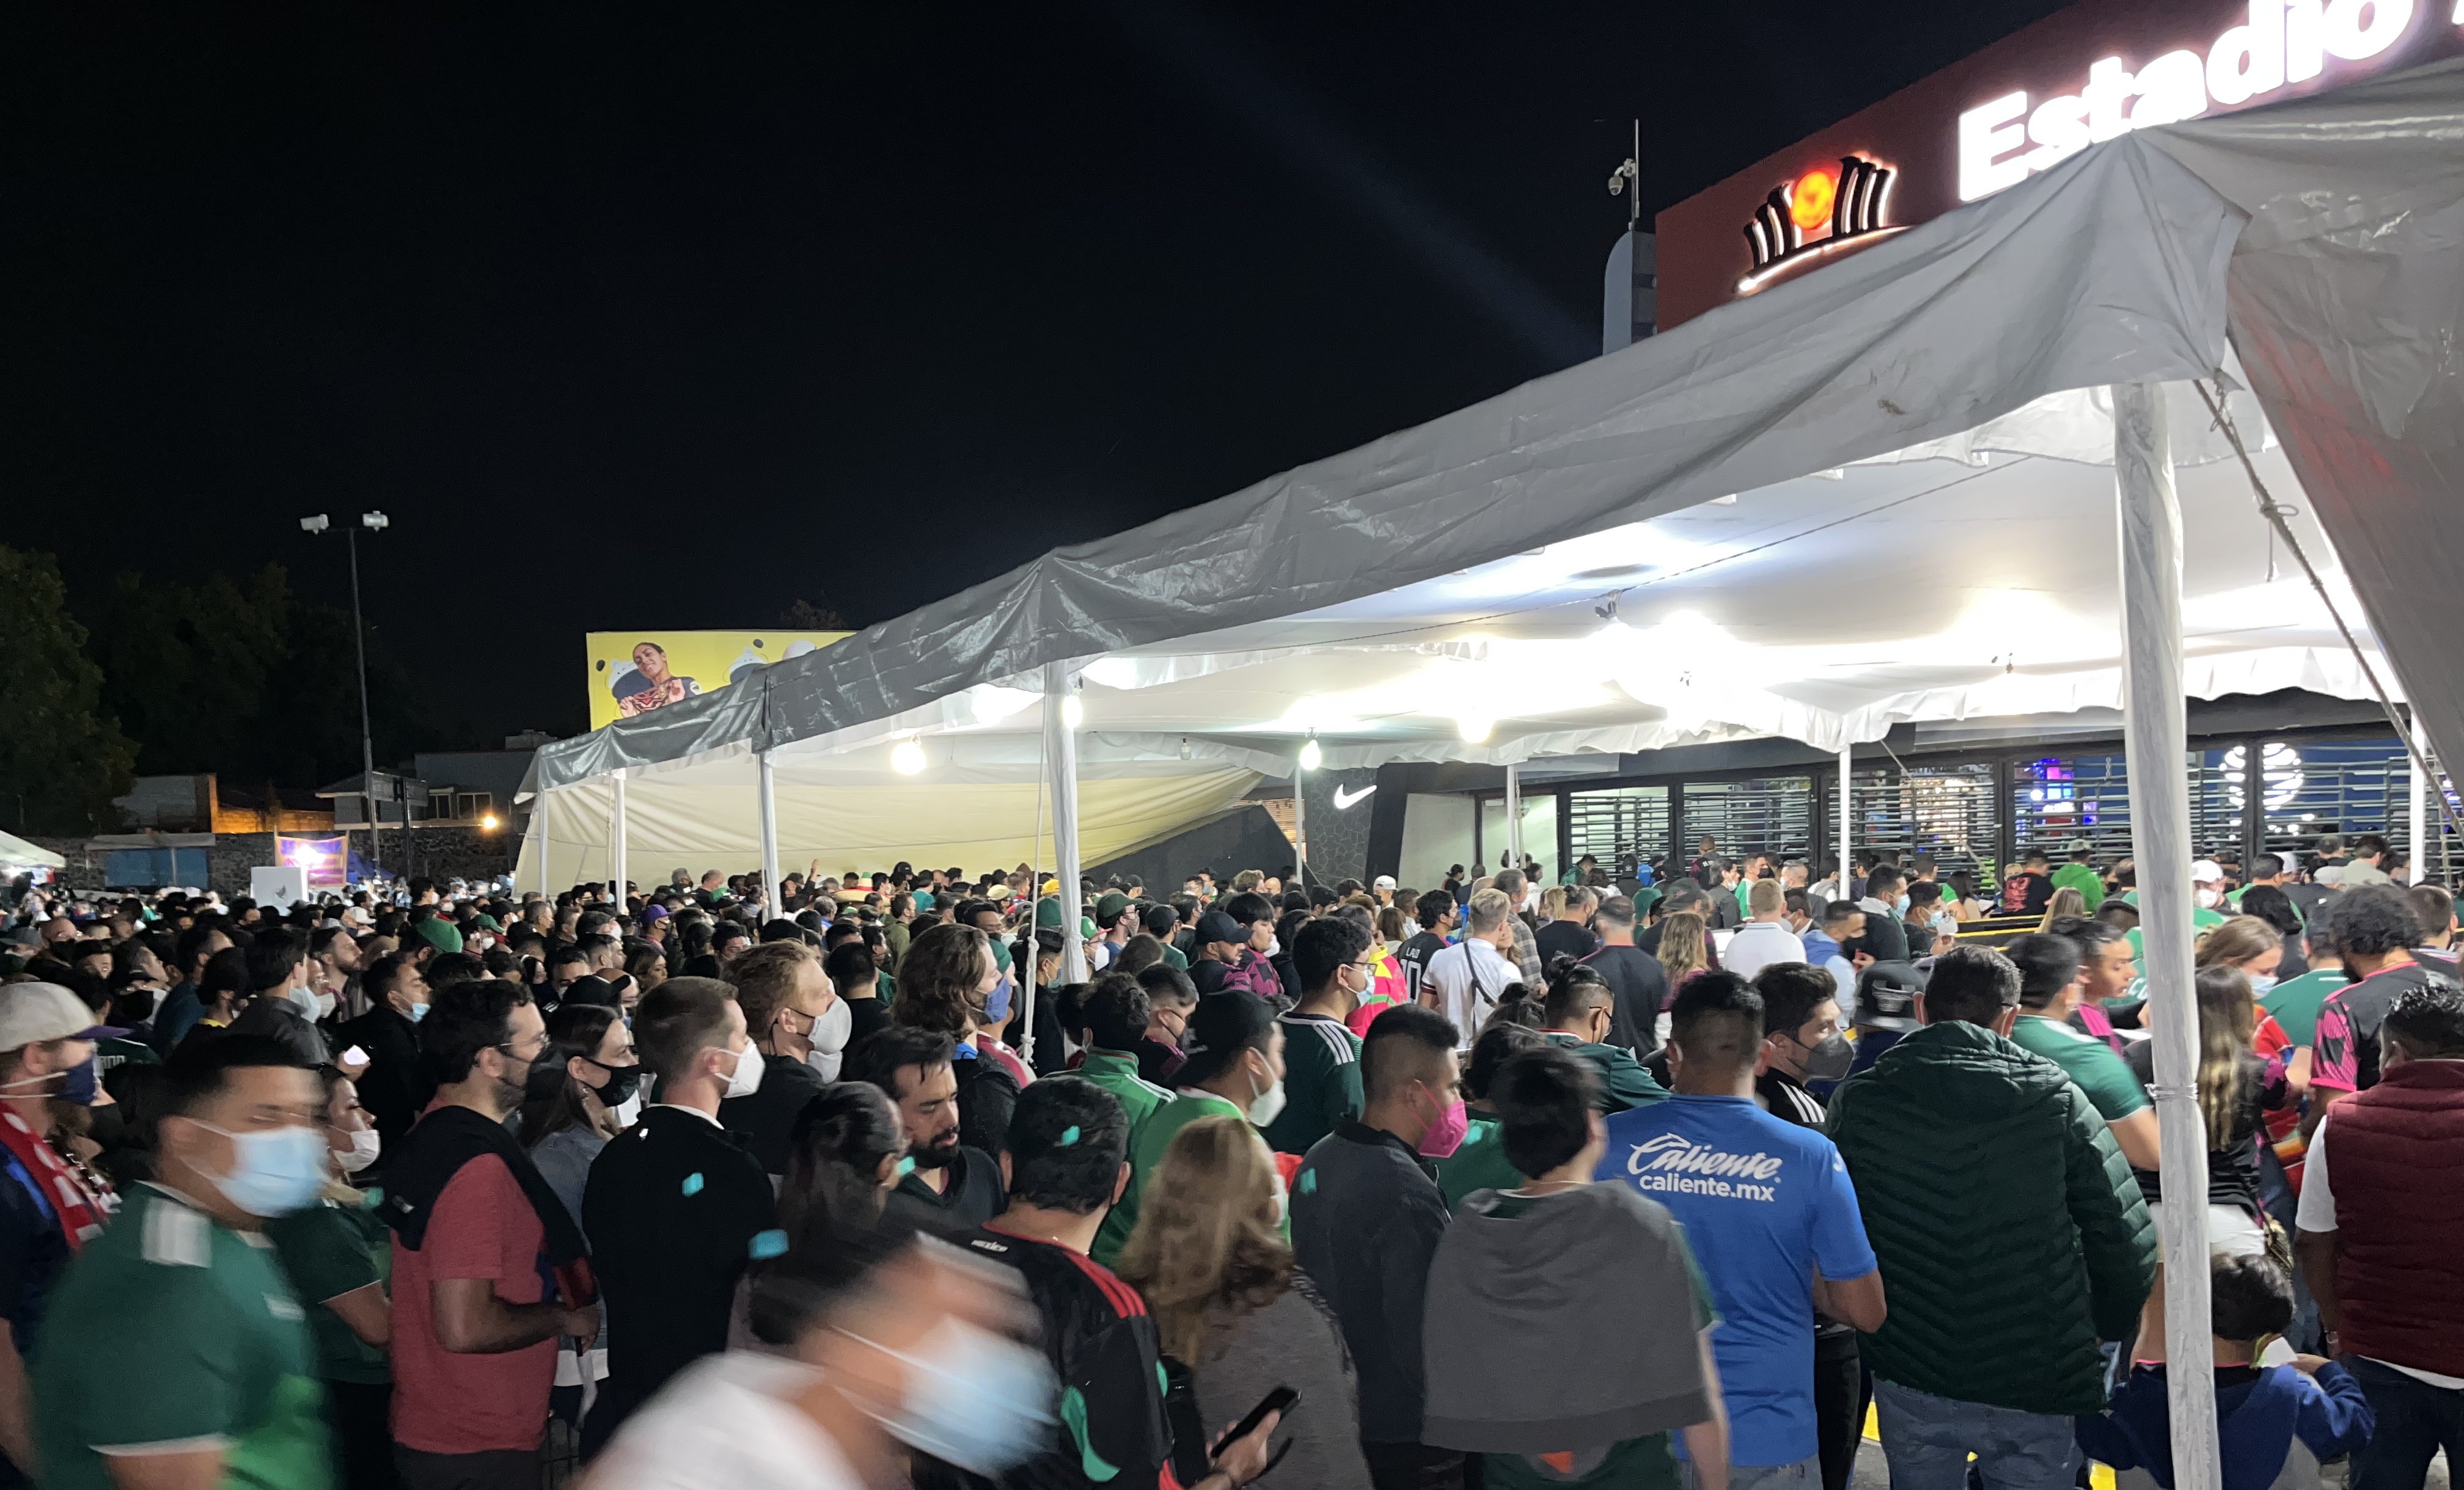 Access to the turnstiles of the Azteca stadium ended about 50 minutes after Mexico's Clasico against the United States (Photo: Carlos Alberto Perez/Infobay)